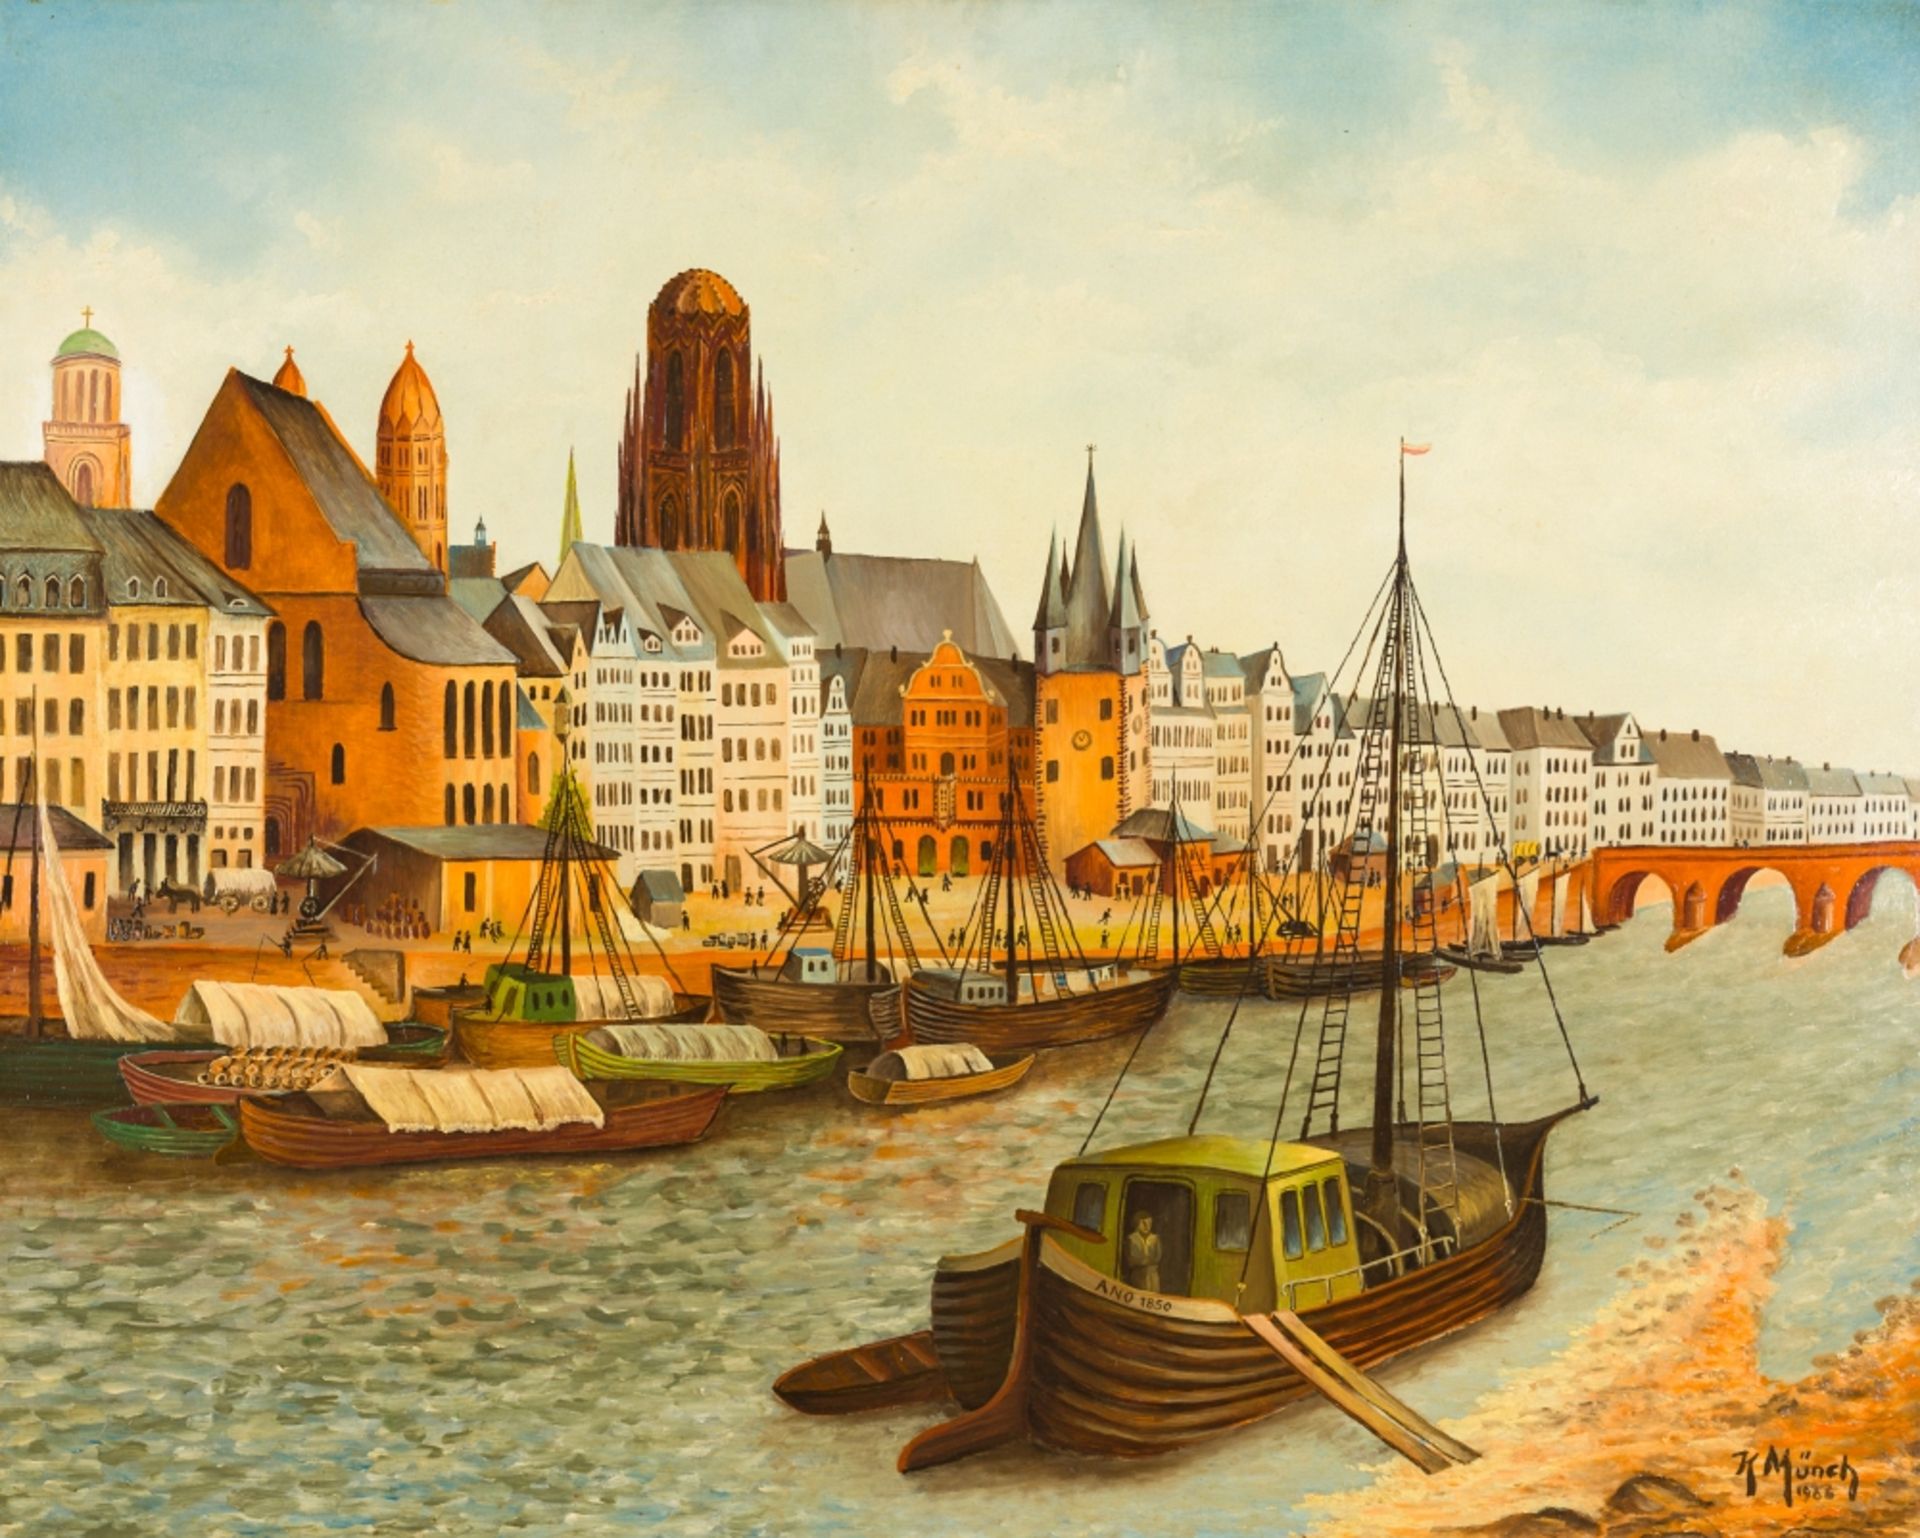 Münch, K.View at Frankfurt am Main, 1966Oil on HardboardSigned and dated lower right30,7 x 38,6 in